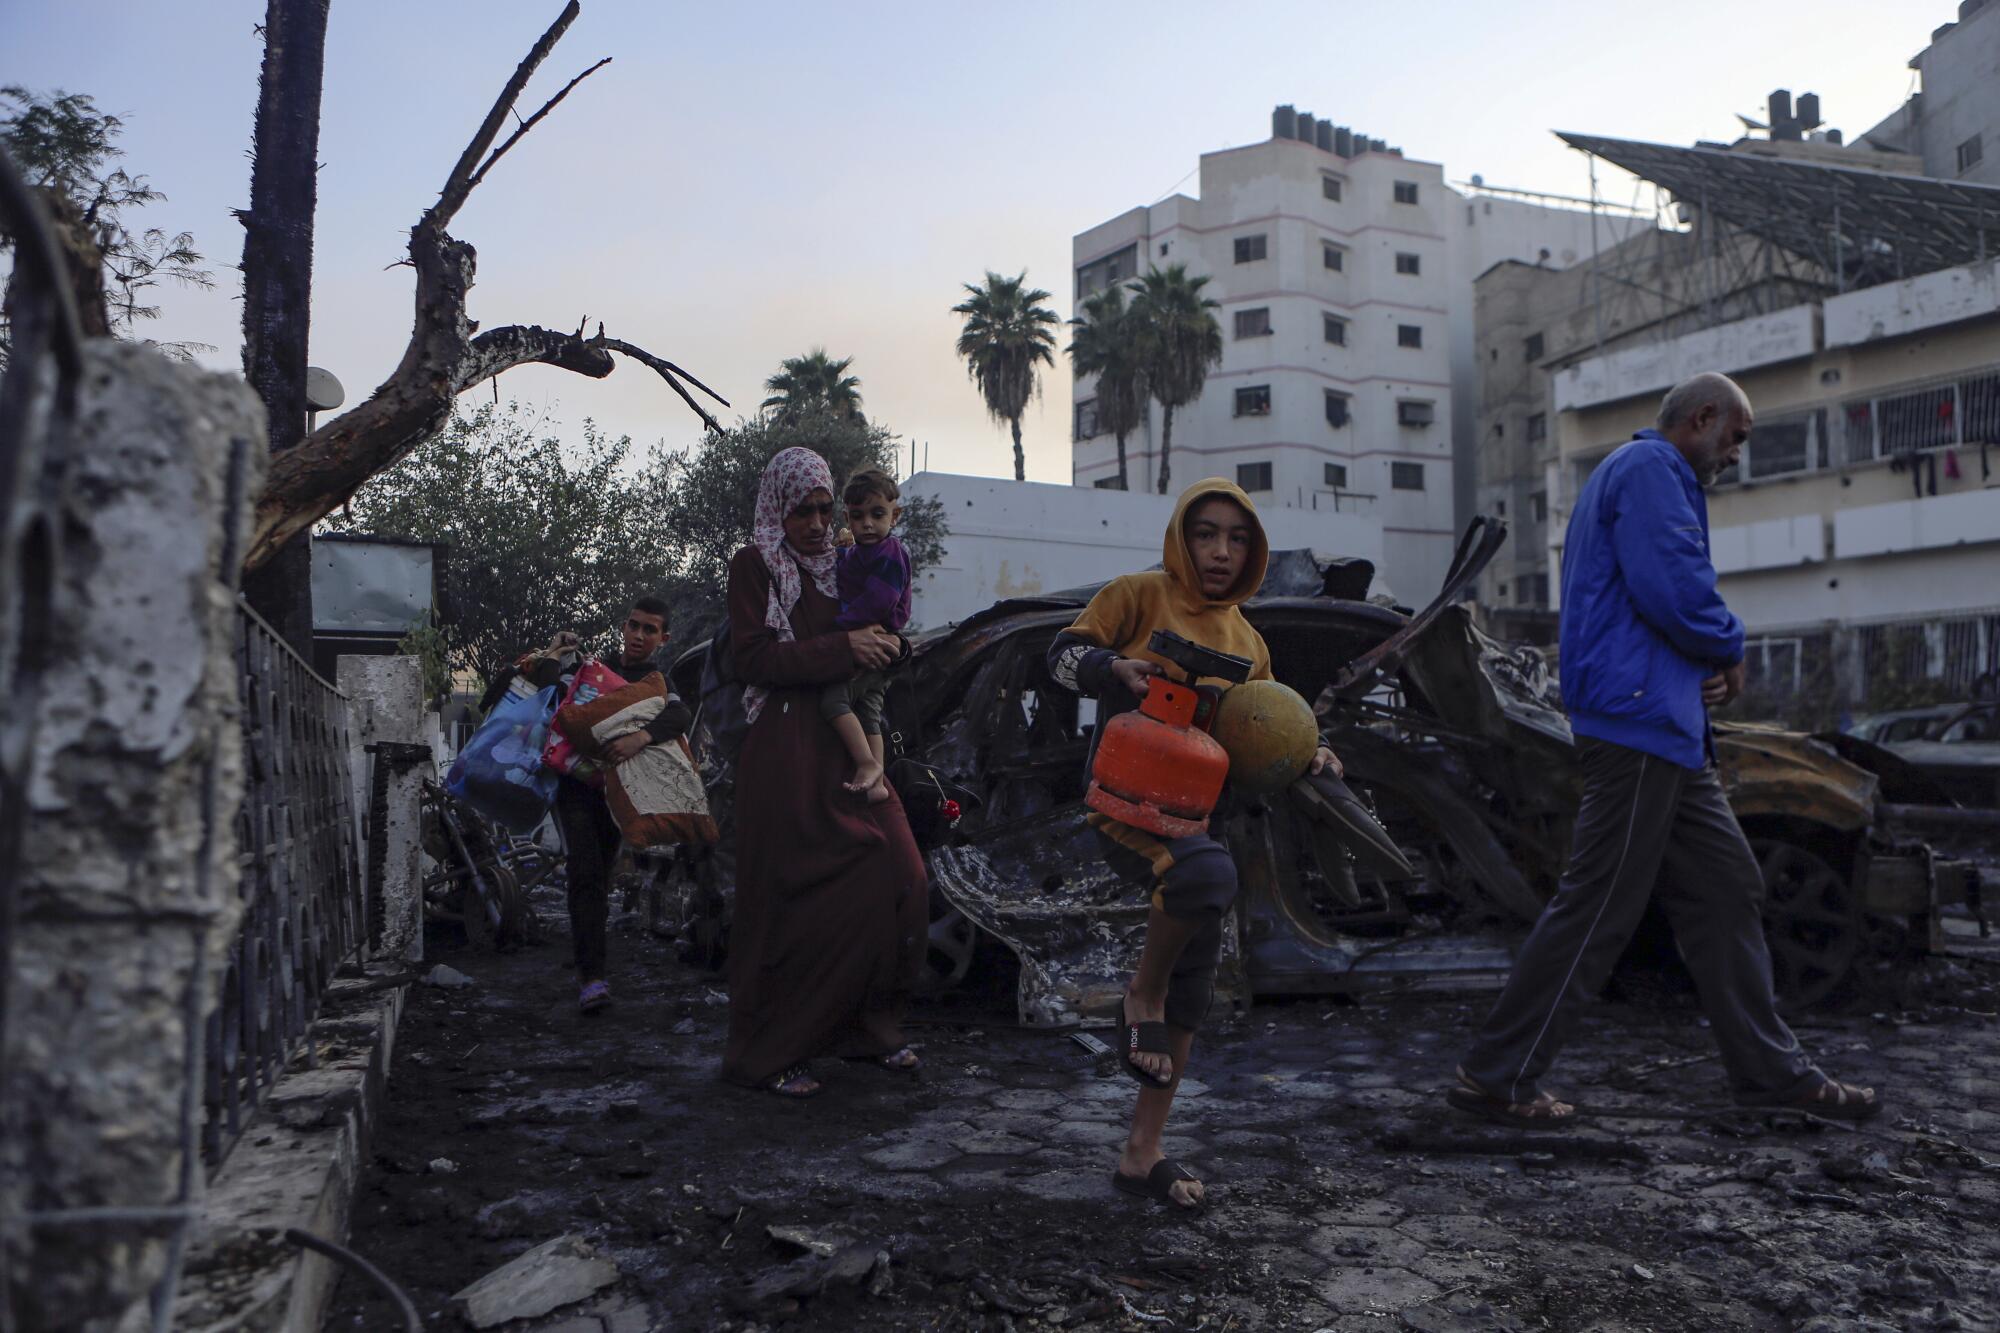 People carrying belonging walk amid the charred wreckage of a vehicle near multistory buildings 